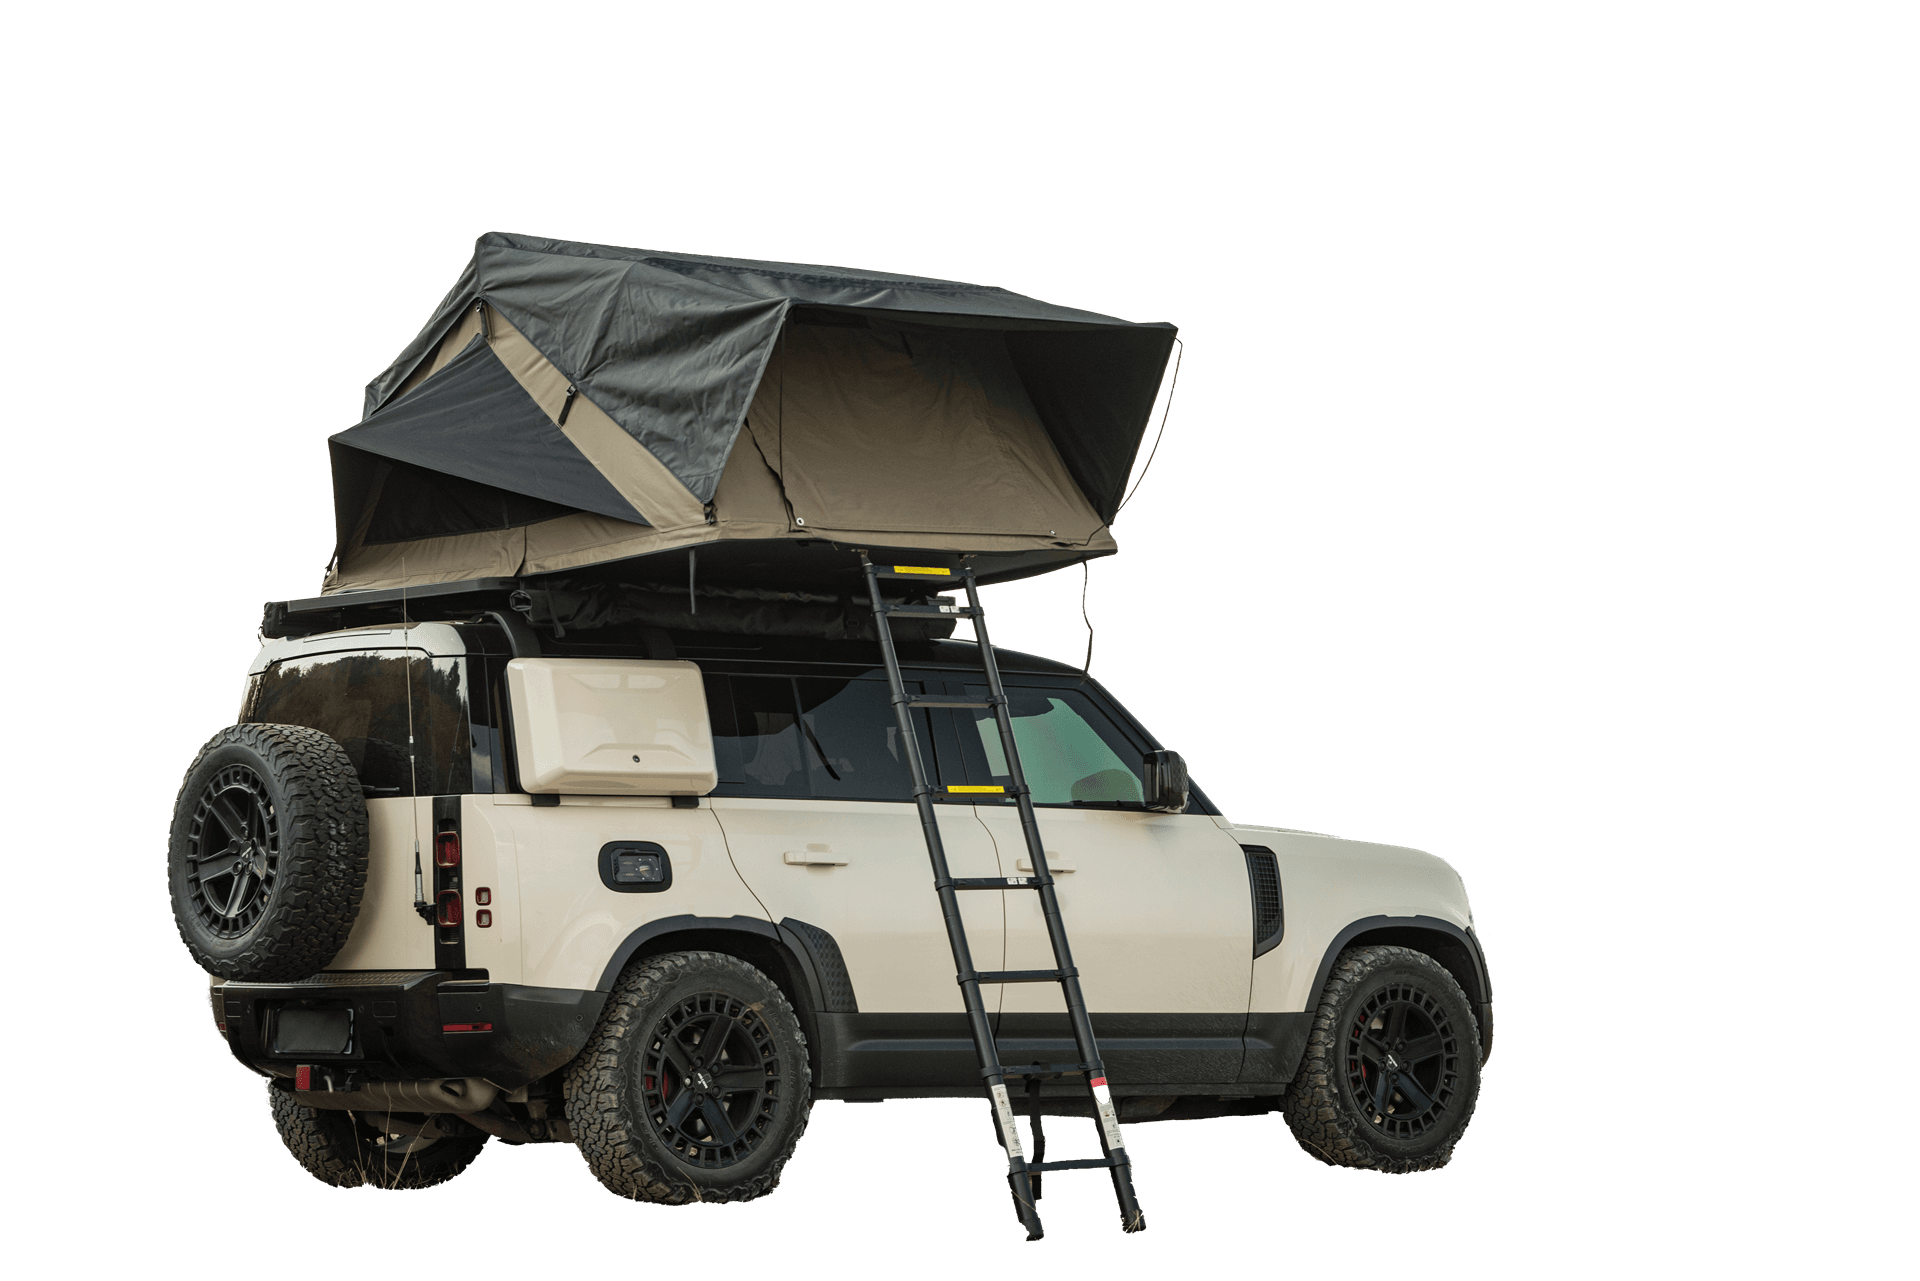 Roveroll Snail Soft Shell Roof Top Tent-Taupe Body & Black Rain Fly - 63 in - SS002